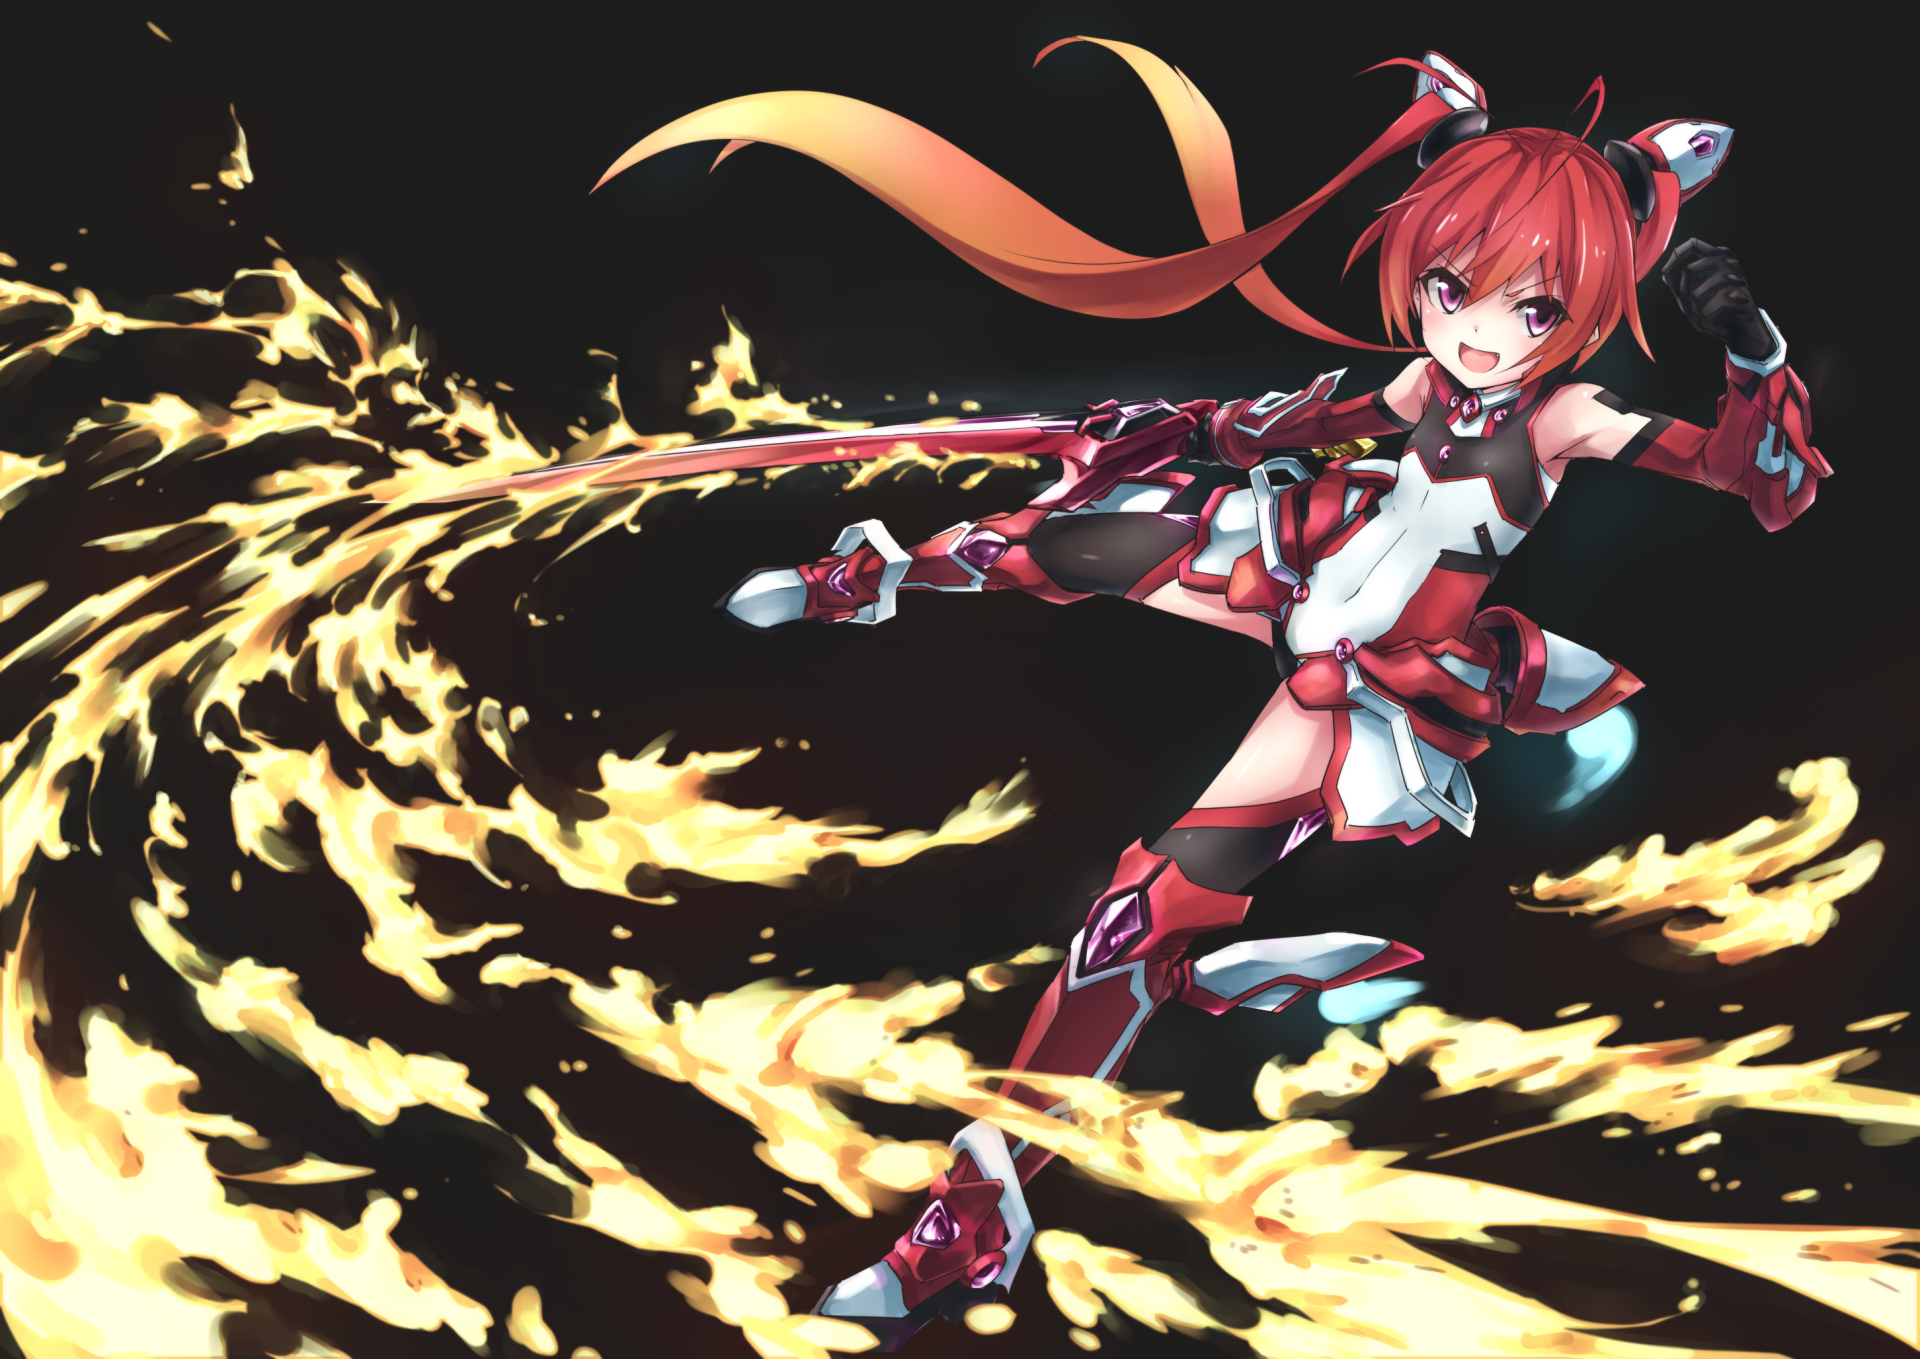 Anime Gonna be the Twin-Tail!! HD Wallpaper | Background Image